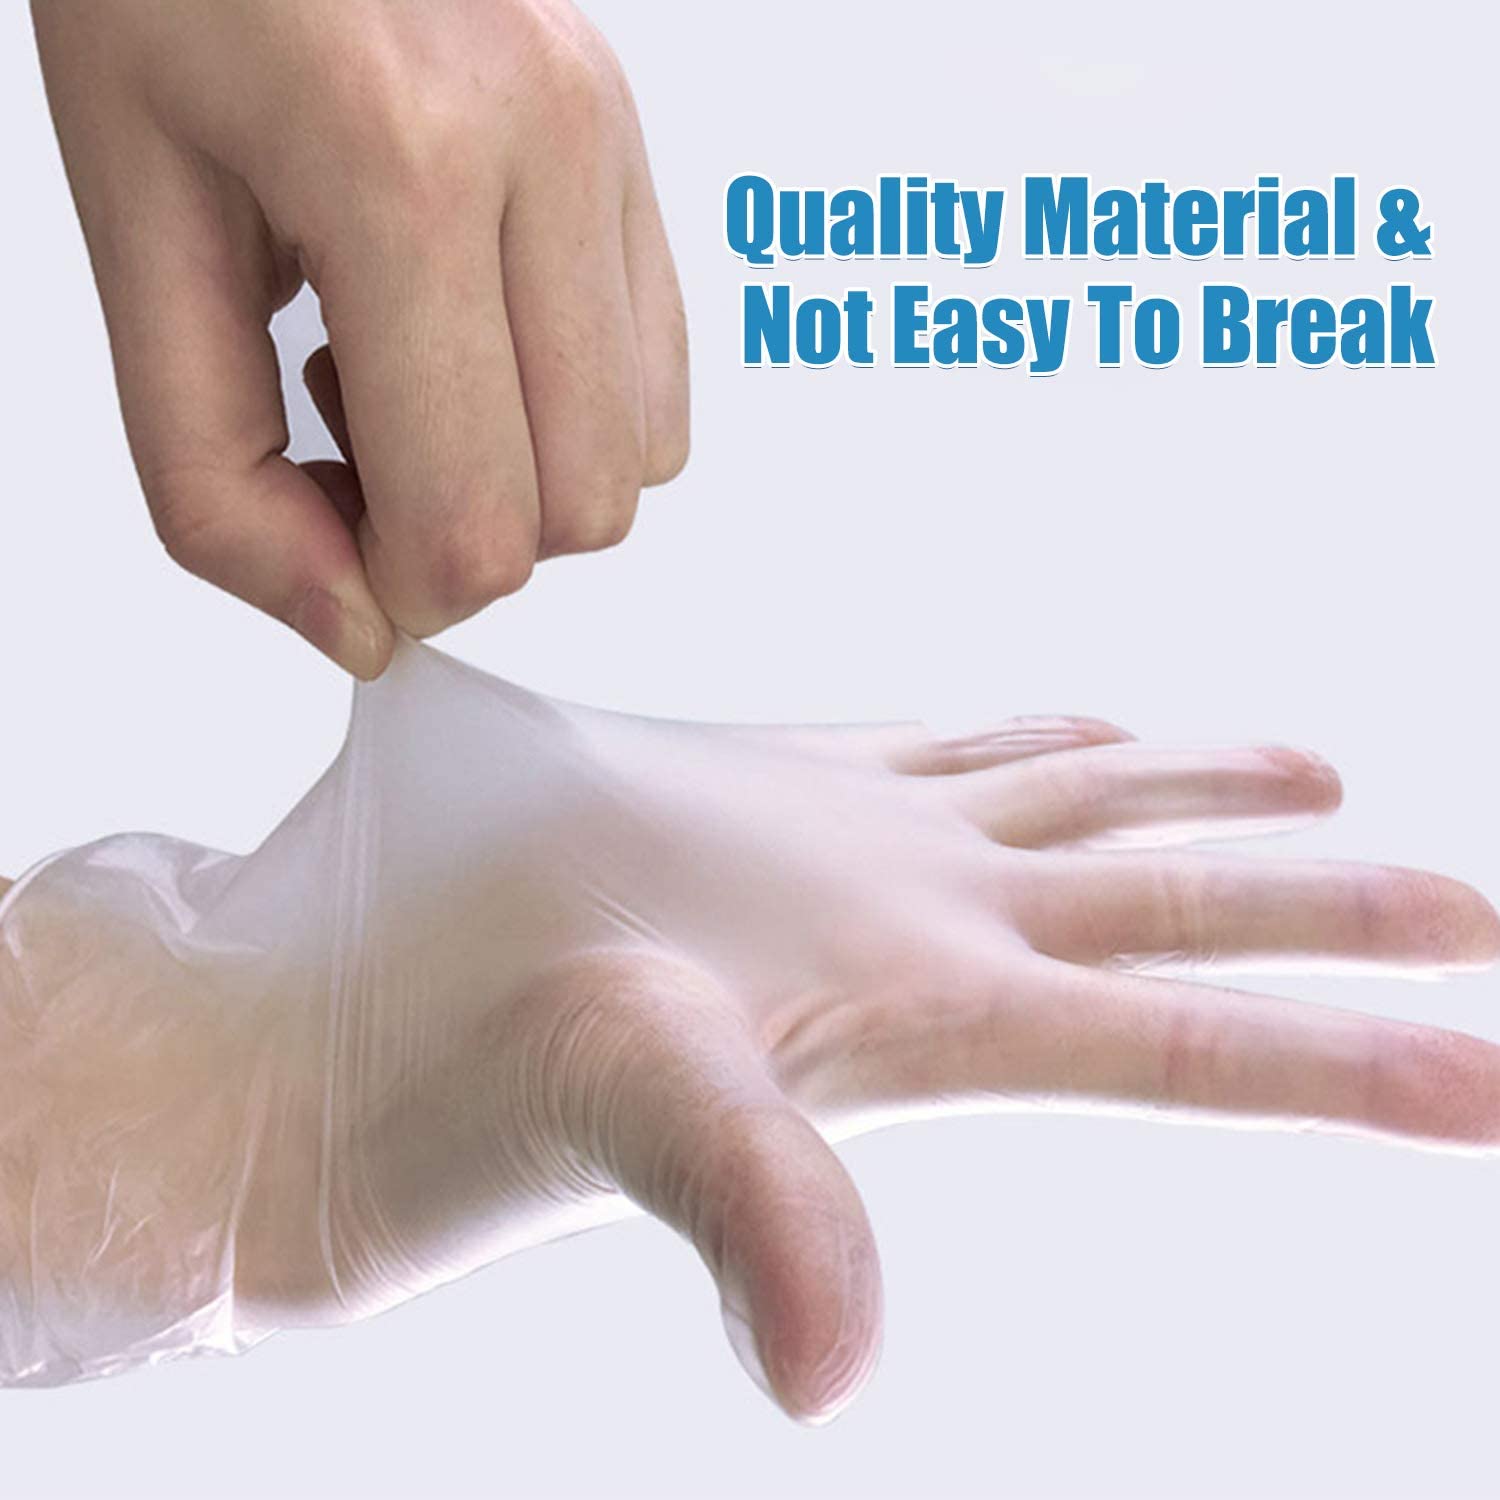 100Pcs-Tearproof-Antibacterial-Safety-Disposable-Glove-Powder-free-Top-Examination-Gloves-L-Size-Str-1659655-4